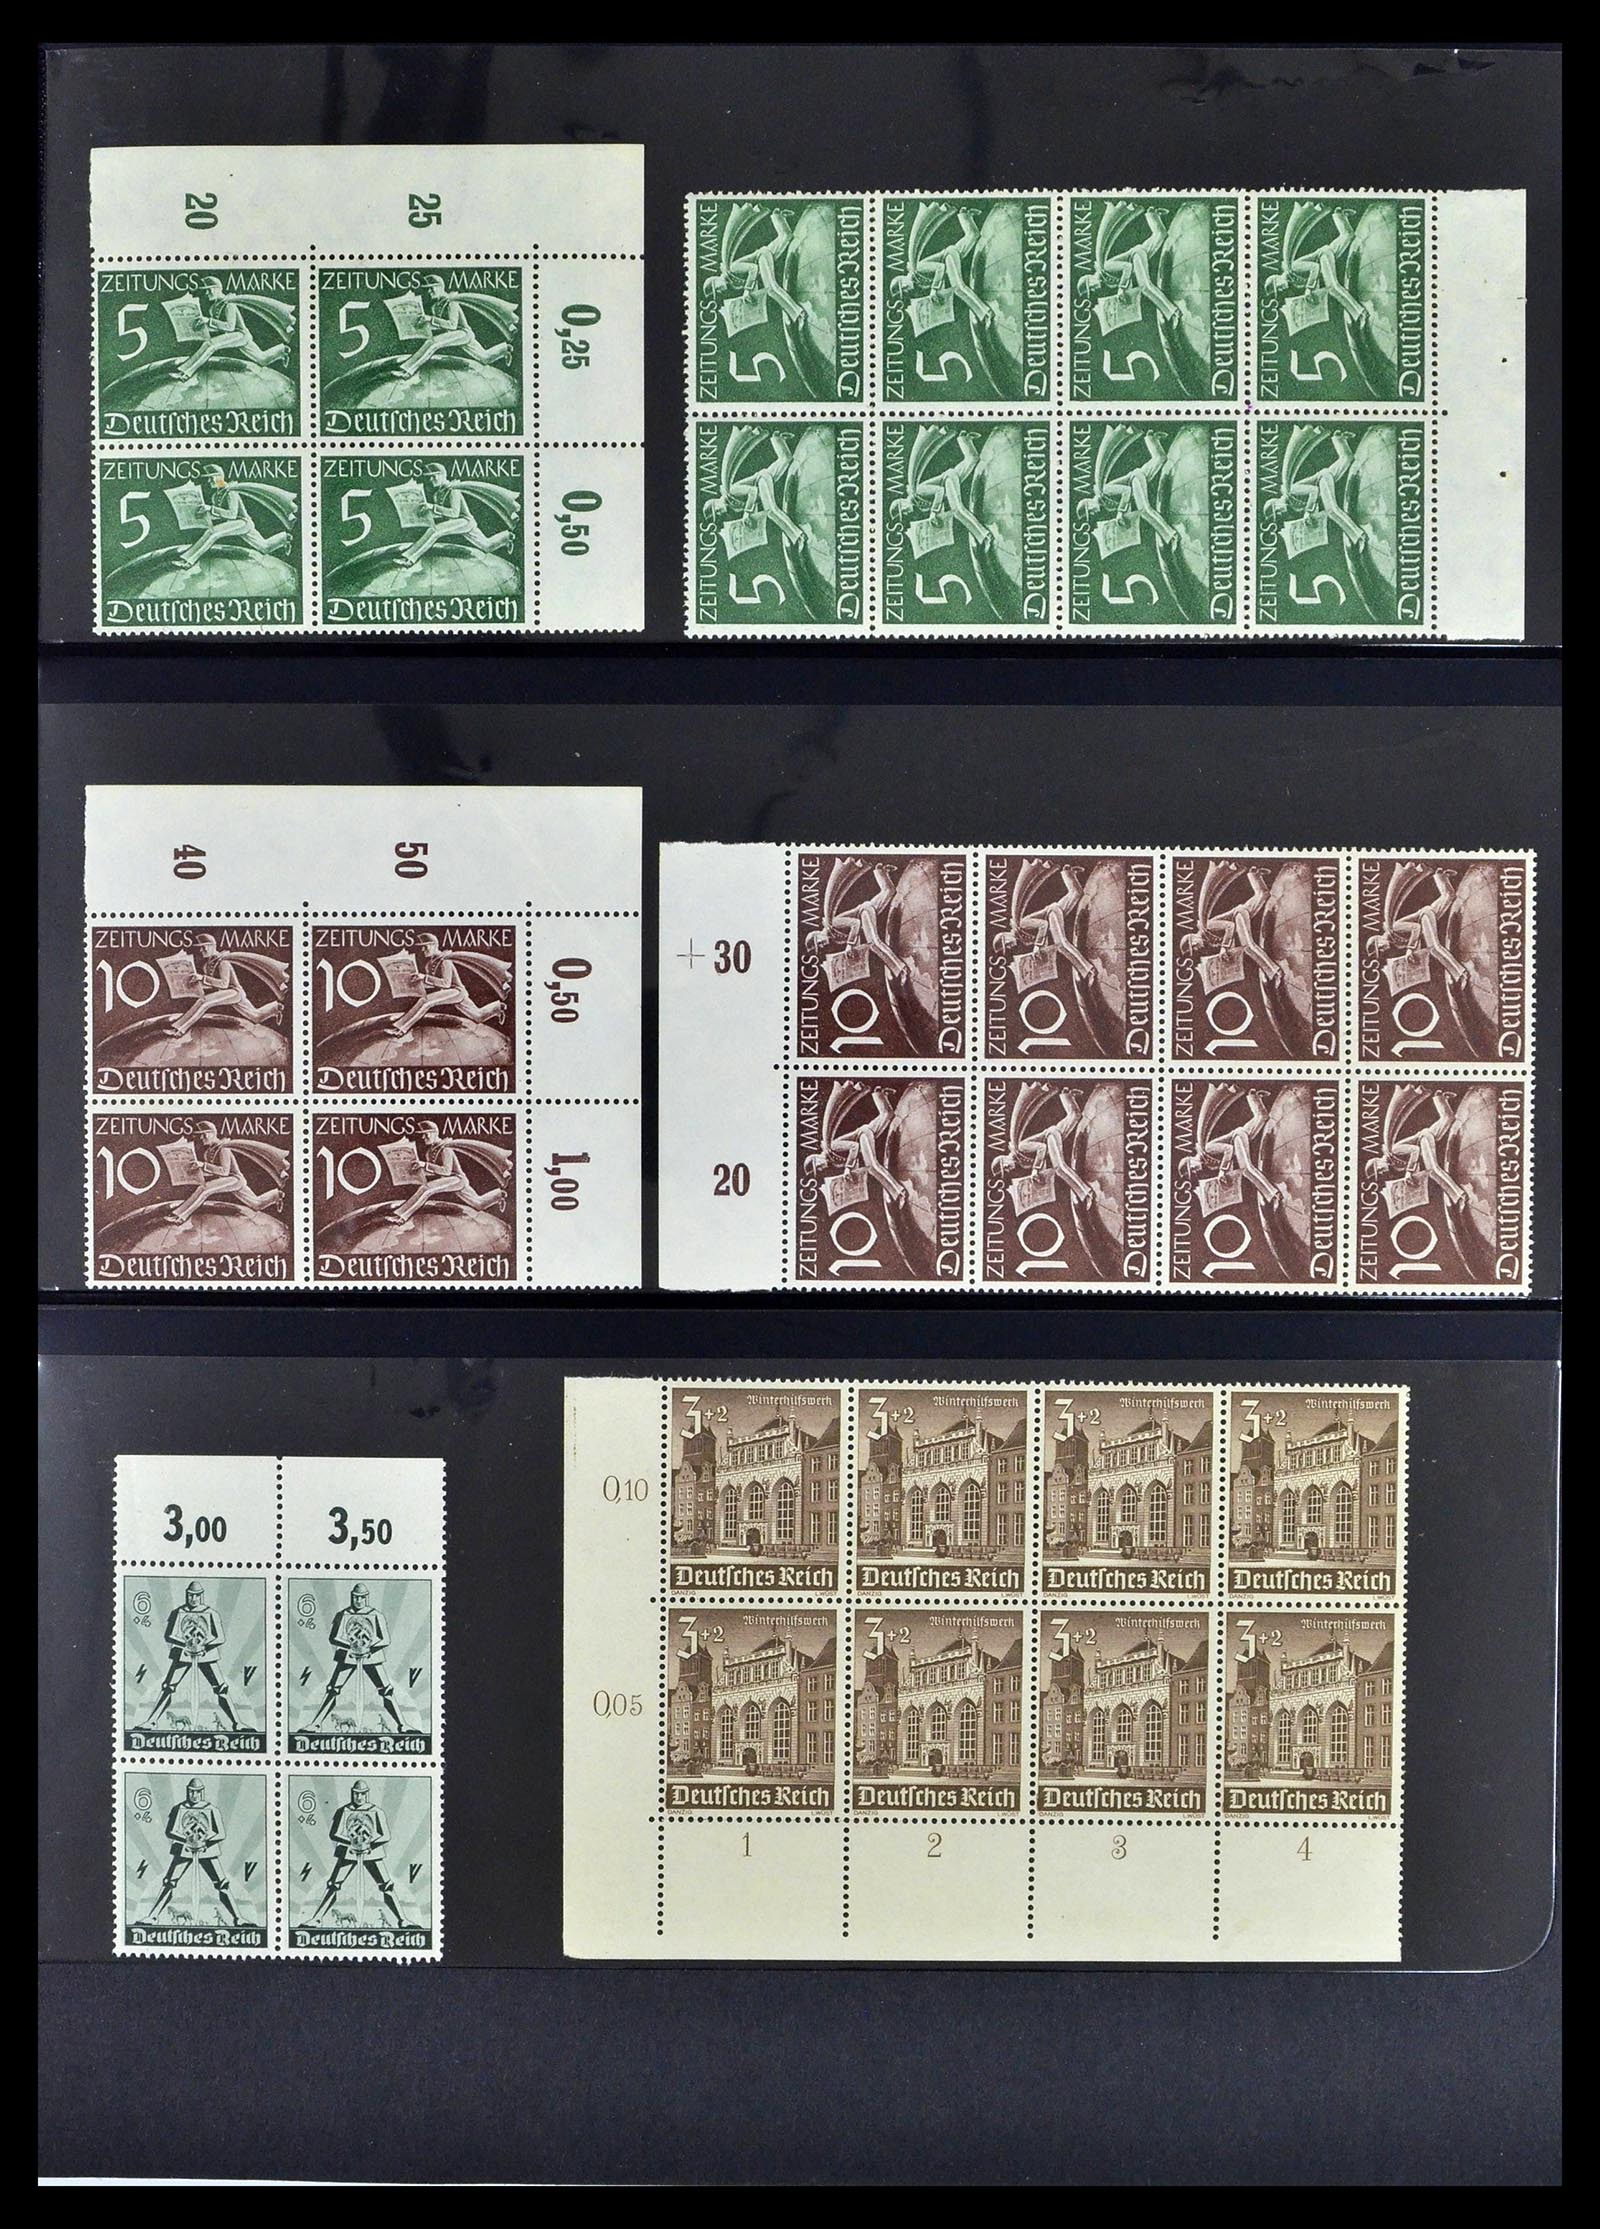 39255 0021 - Stamp collection 39255 German Reich MNH blocks of 4.